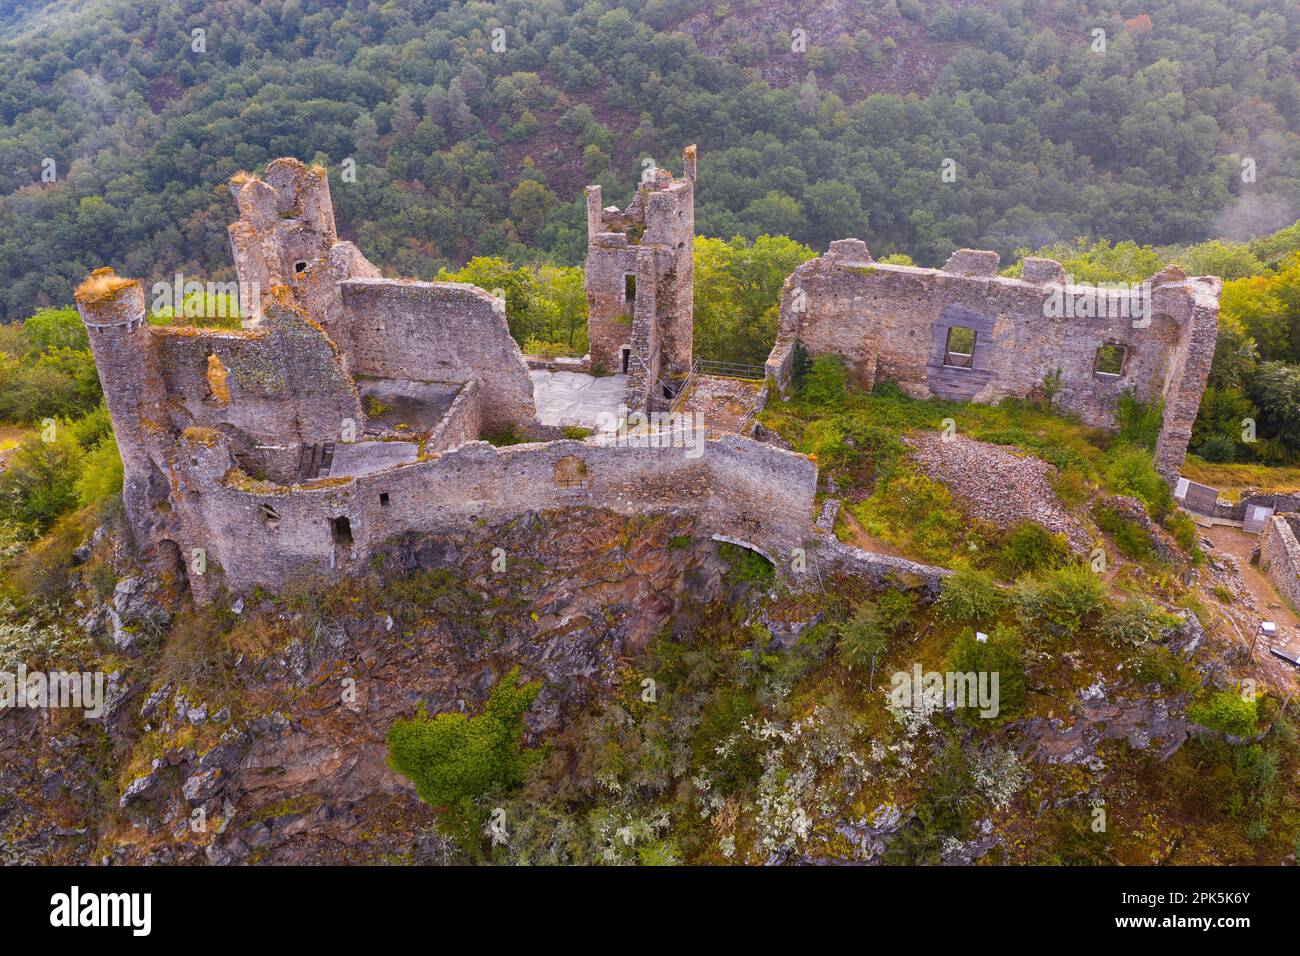 Top view of the ruin castle Chateau Rocher Stock Photo